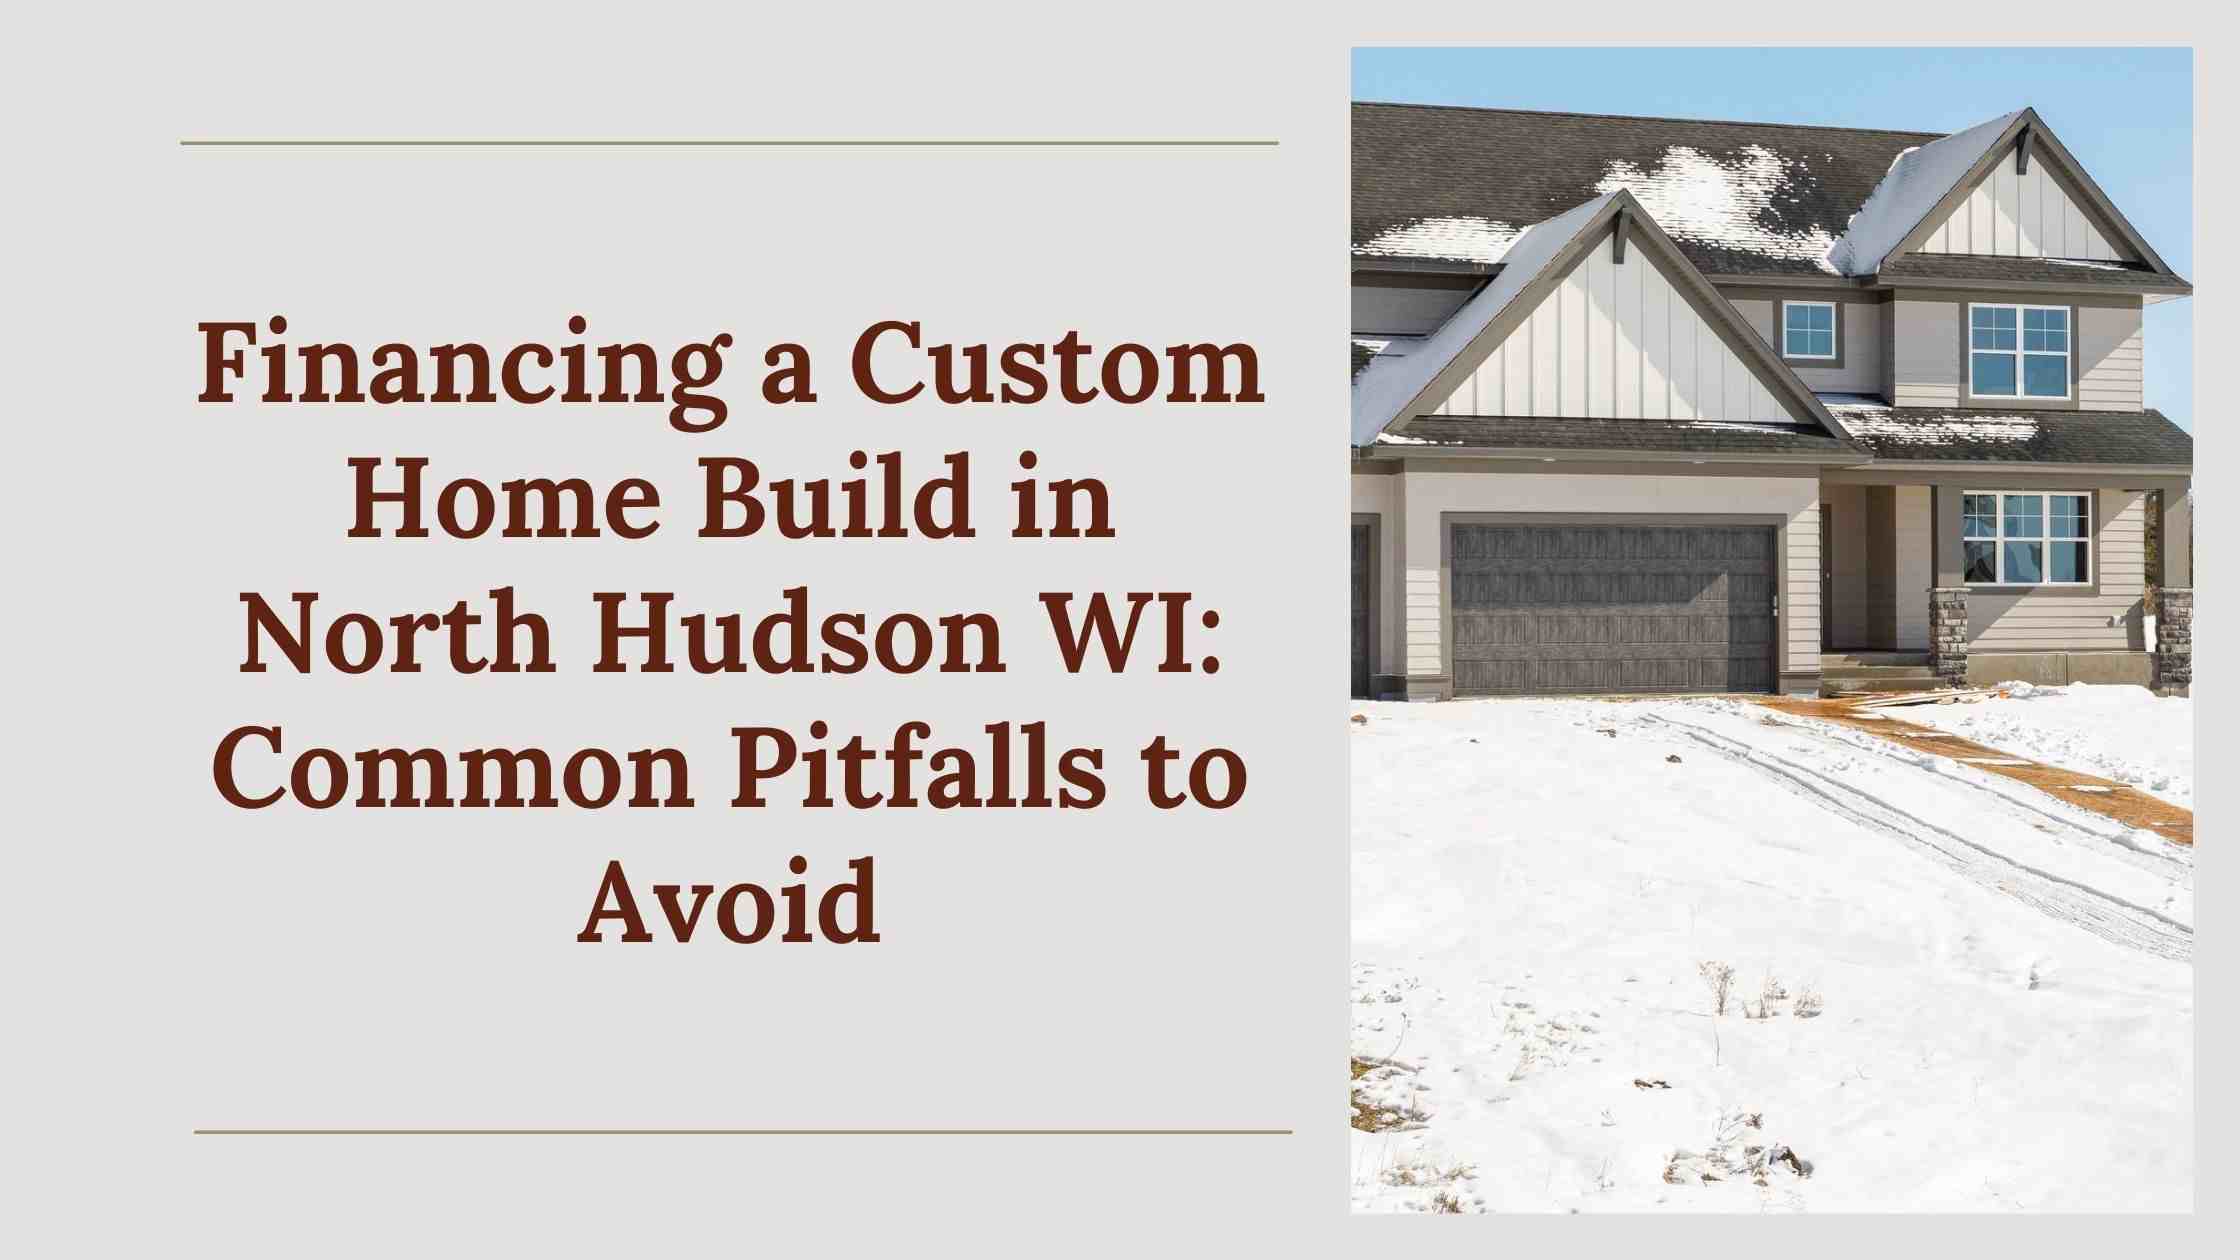 Finance a Custom Home Build in North Hudson WI: Easy Pitfalls to Avoid